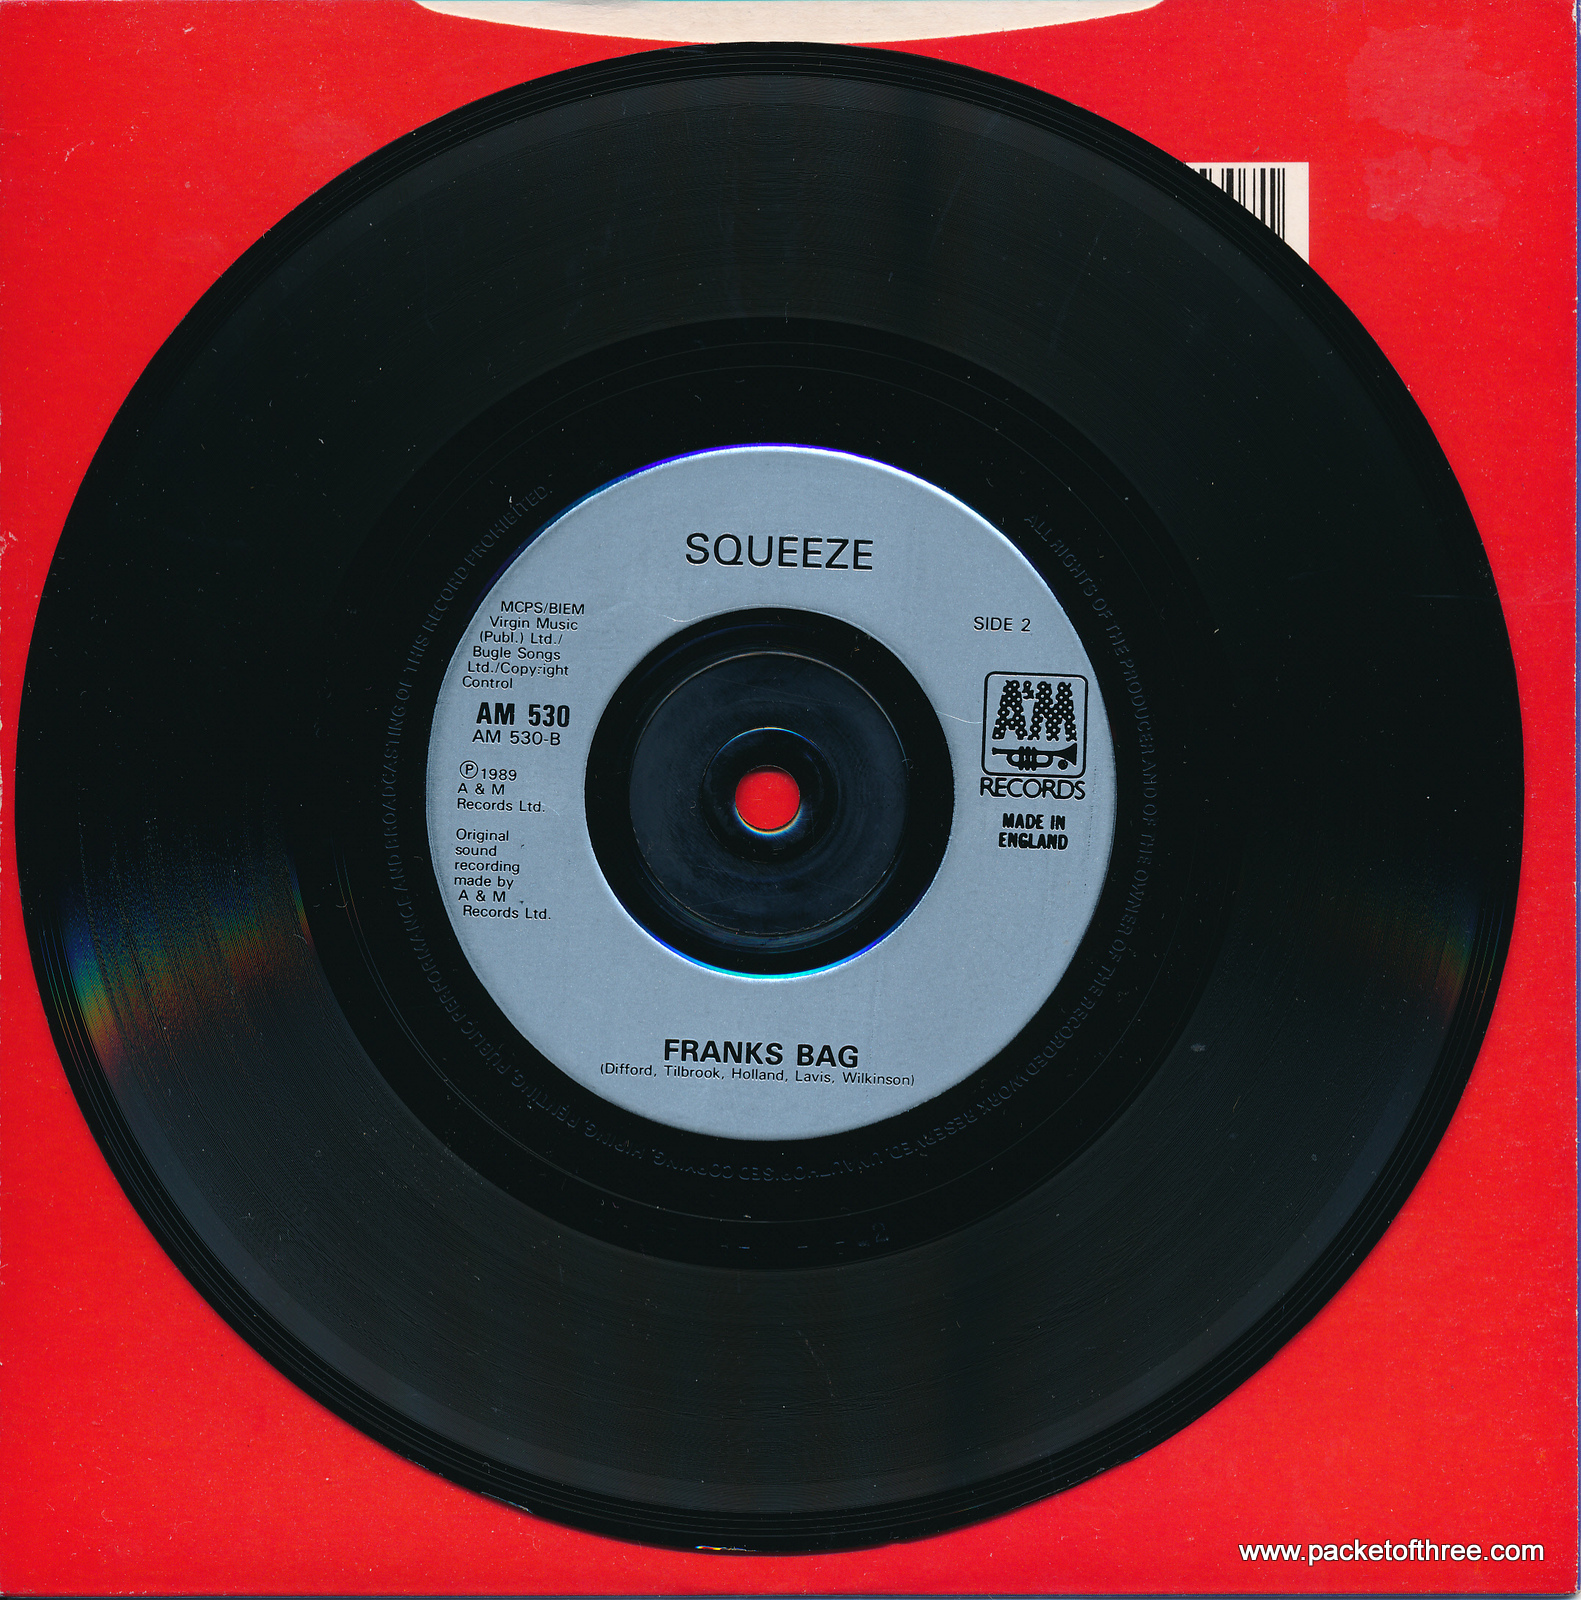 If It's Love - UK - 7" - picture sleeve